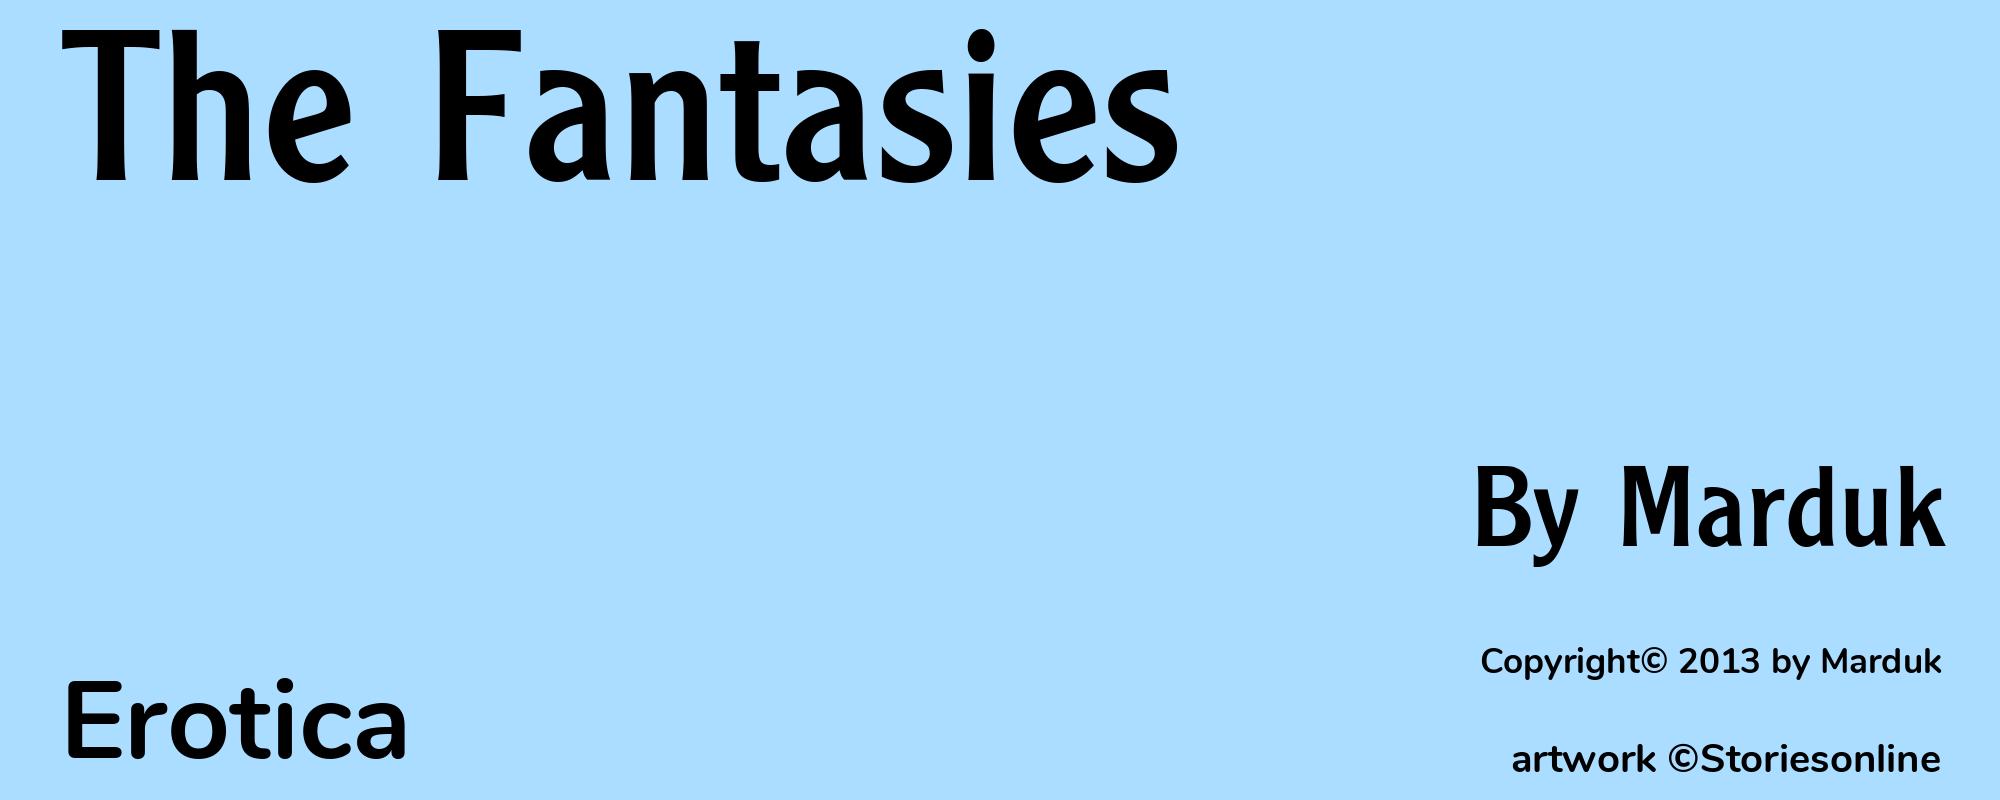 The Fantasies - Cover